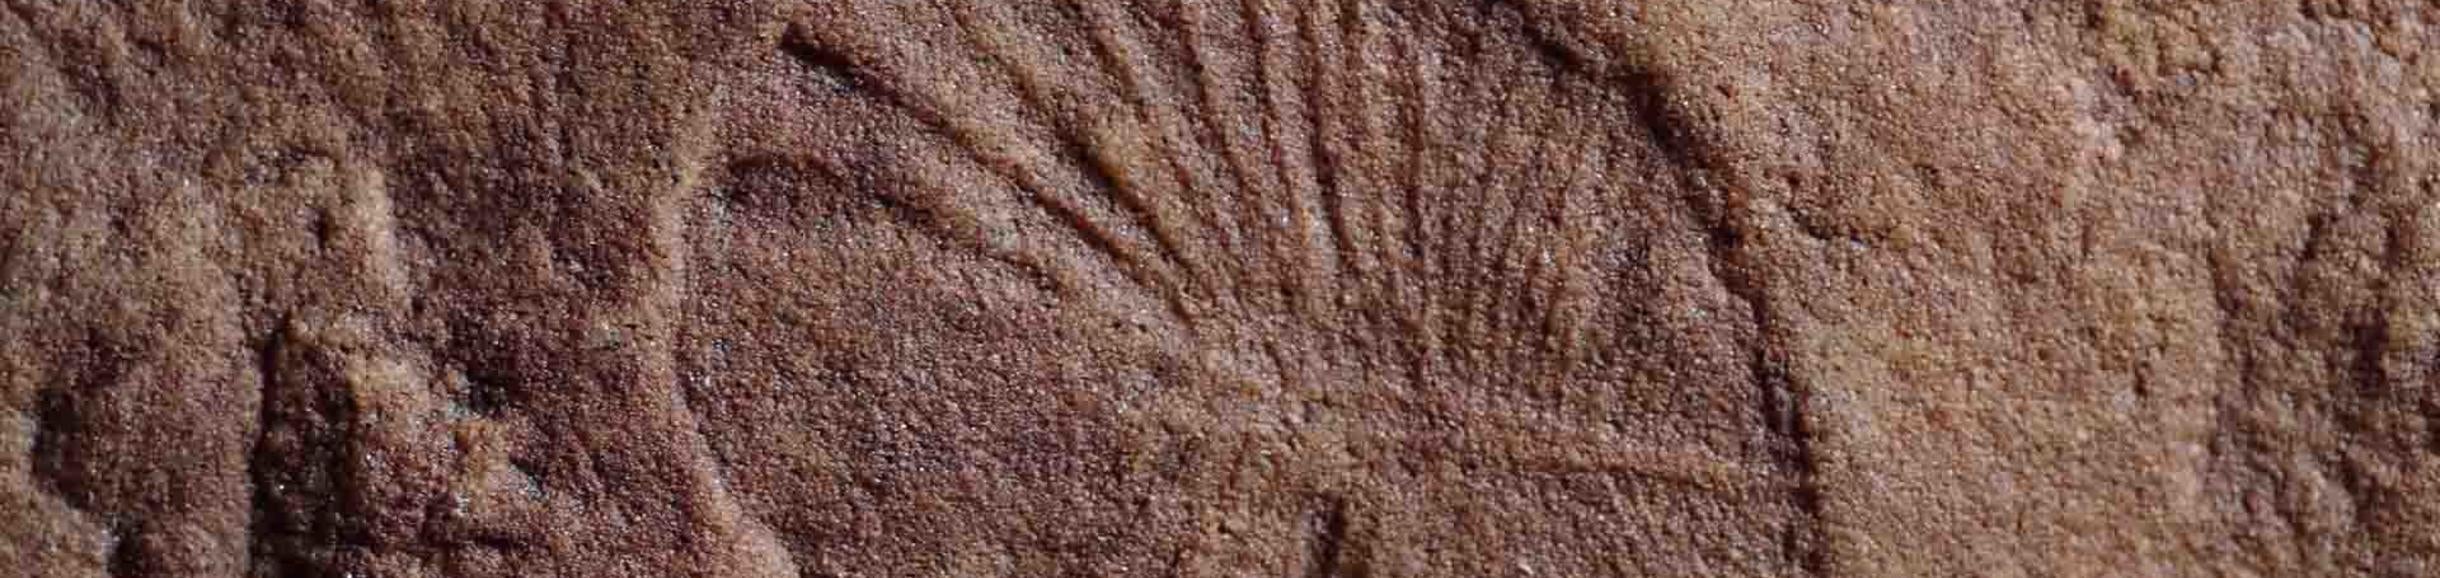 Fossilized remains of Dickinsonia found at the Nilpena Heritage site in Australia. (Scott Evans / UCR)